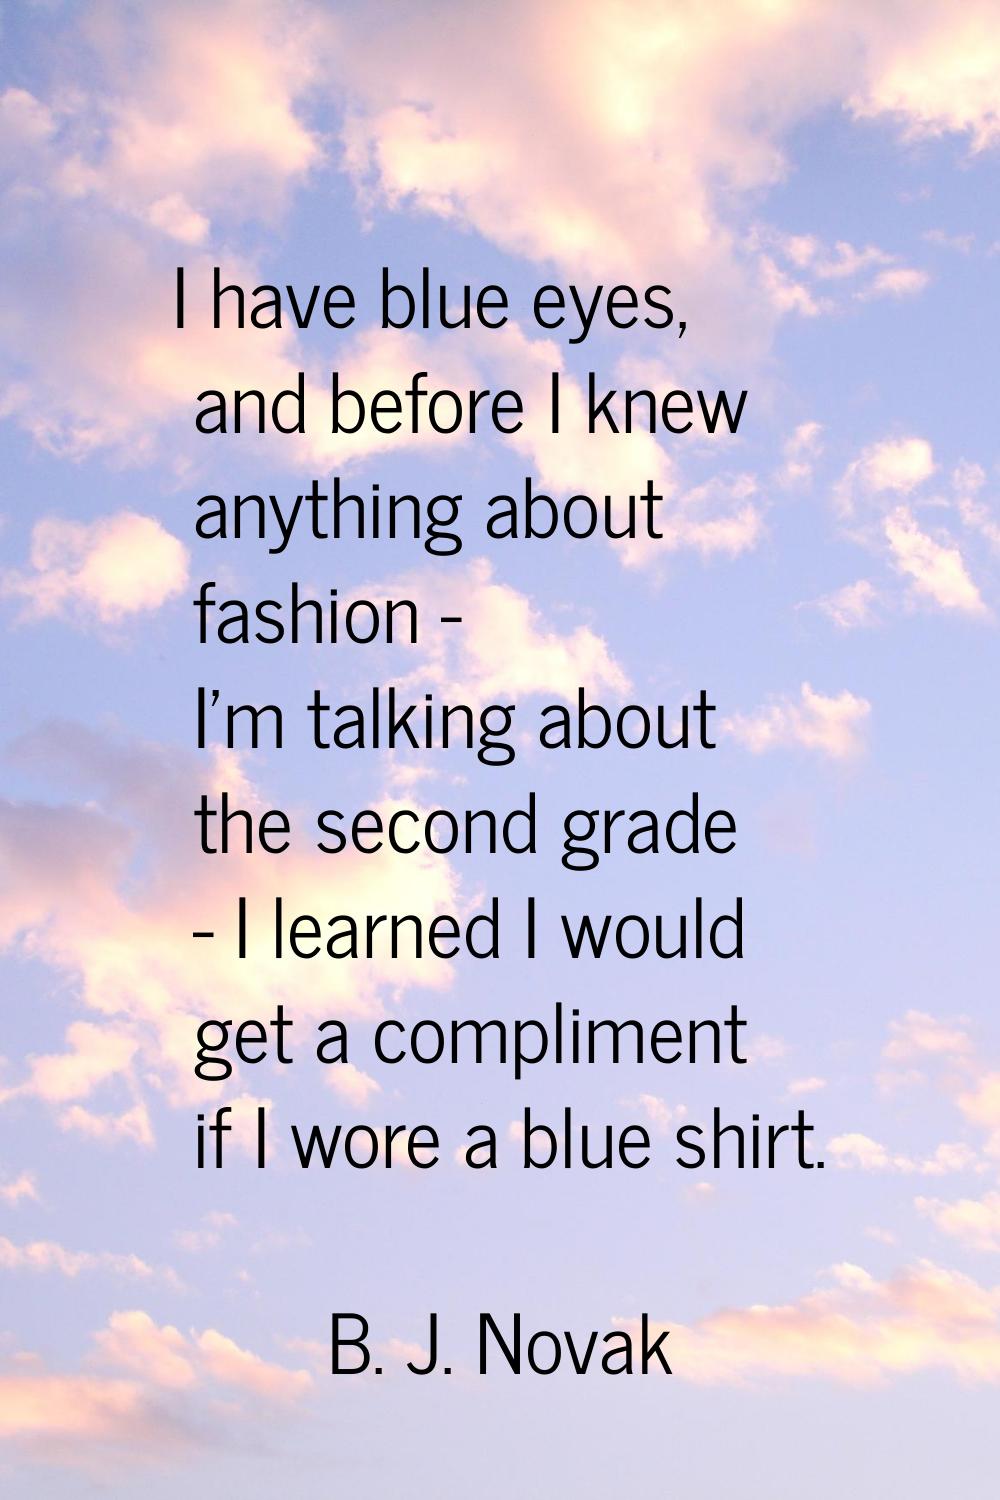 I have blue eyes, and before I knew anything about fashion - I'm talking about the second grade - I